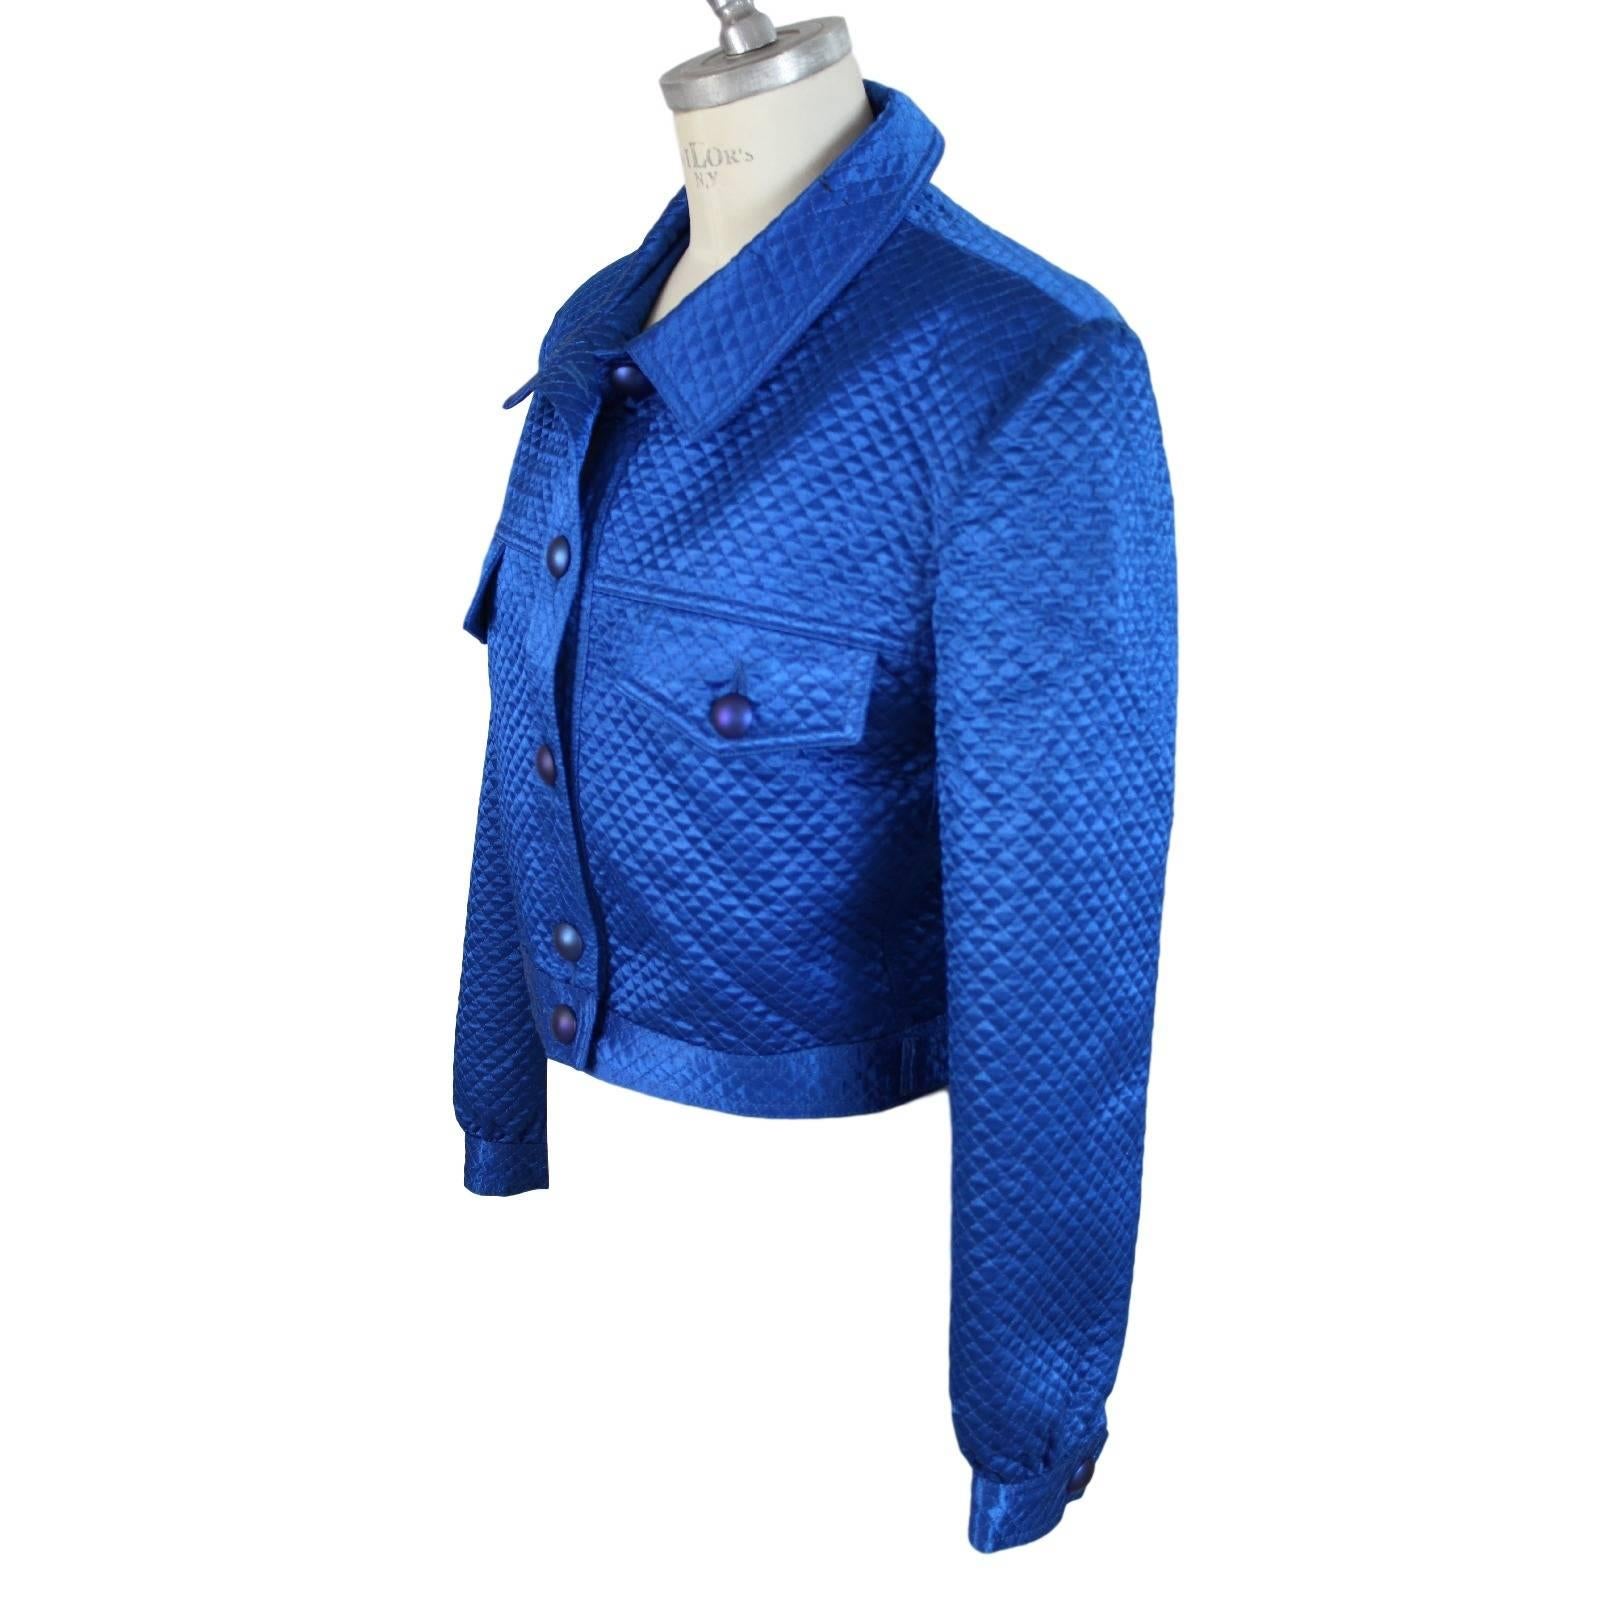 Mimmina jacket vintage  blue electric type motorcycle for women’s  1980s, button closure, quilted fabric.

Measurements:

Size 44 Italian
Shoulders: 44 cm
Armpit to armpit: 52 cm
Total lenght: 54 cm
Sleeves: 58 cm

Composition: 96% viscose 4%